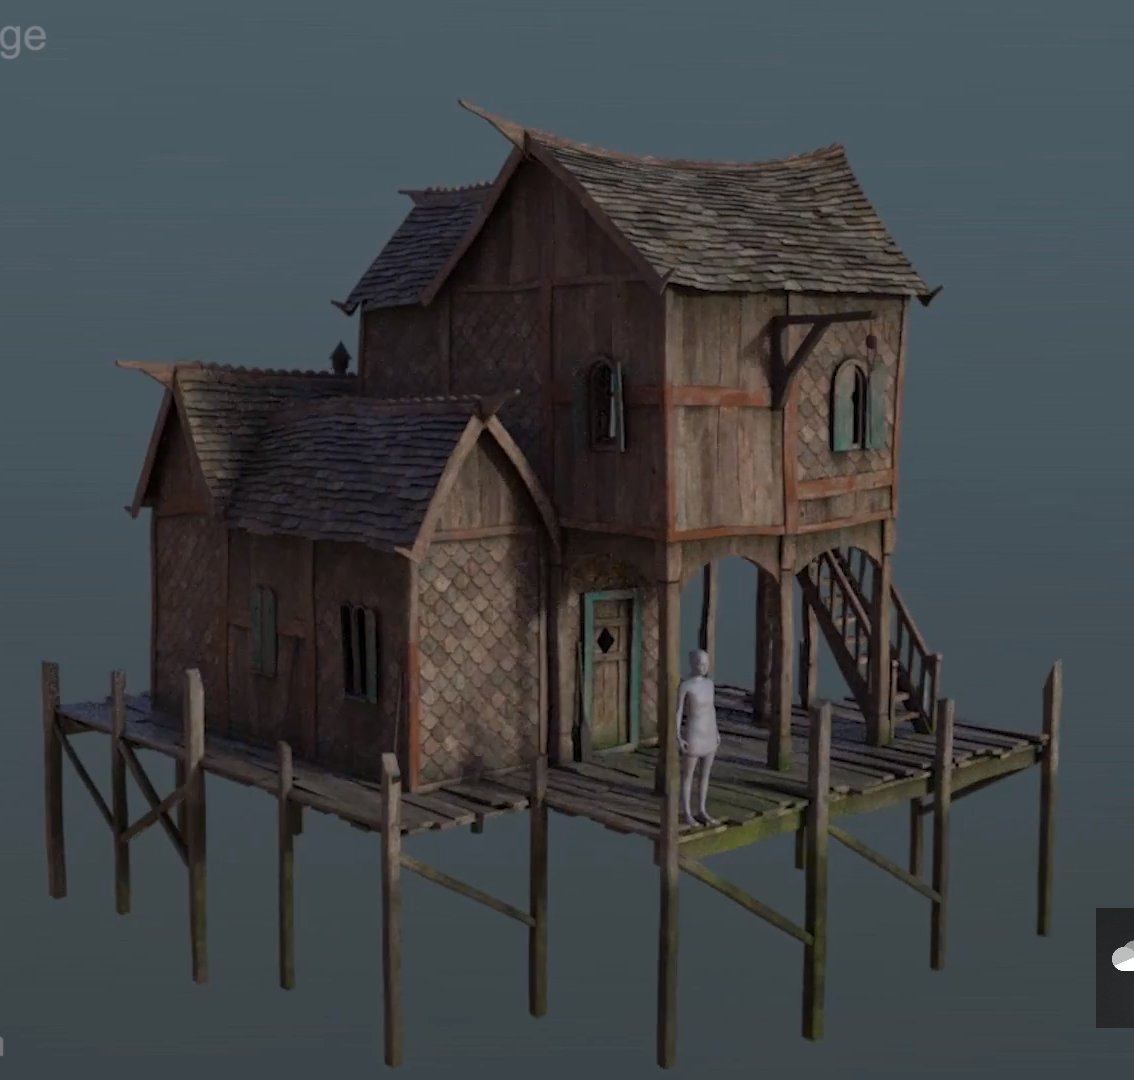 With a good tech artist, nothing is out of reach. Check out these amazing procgen houses by Anastasia Opera. Instead of spending months handcrafting 10 unique houses for a small city, you can generate endless houses, for huge cities. http://gumroad.com/l/ngKUJ 